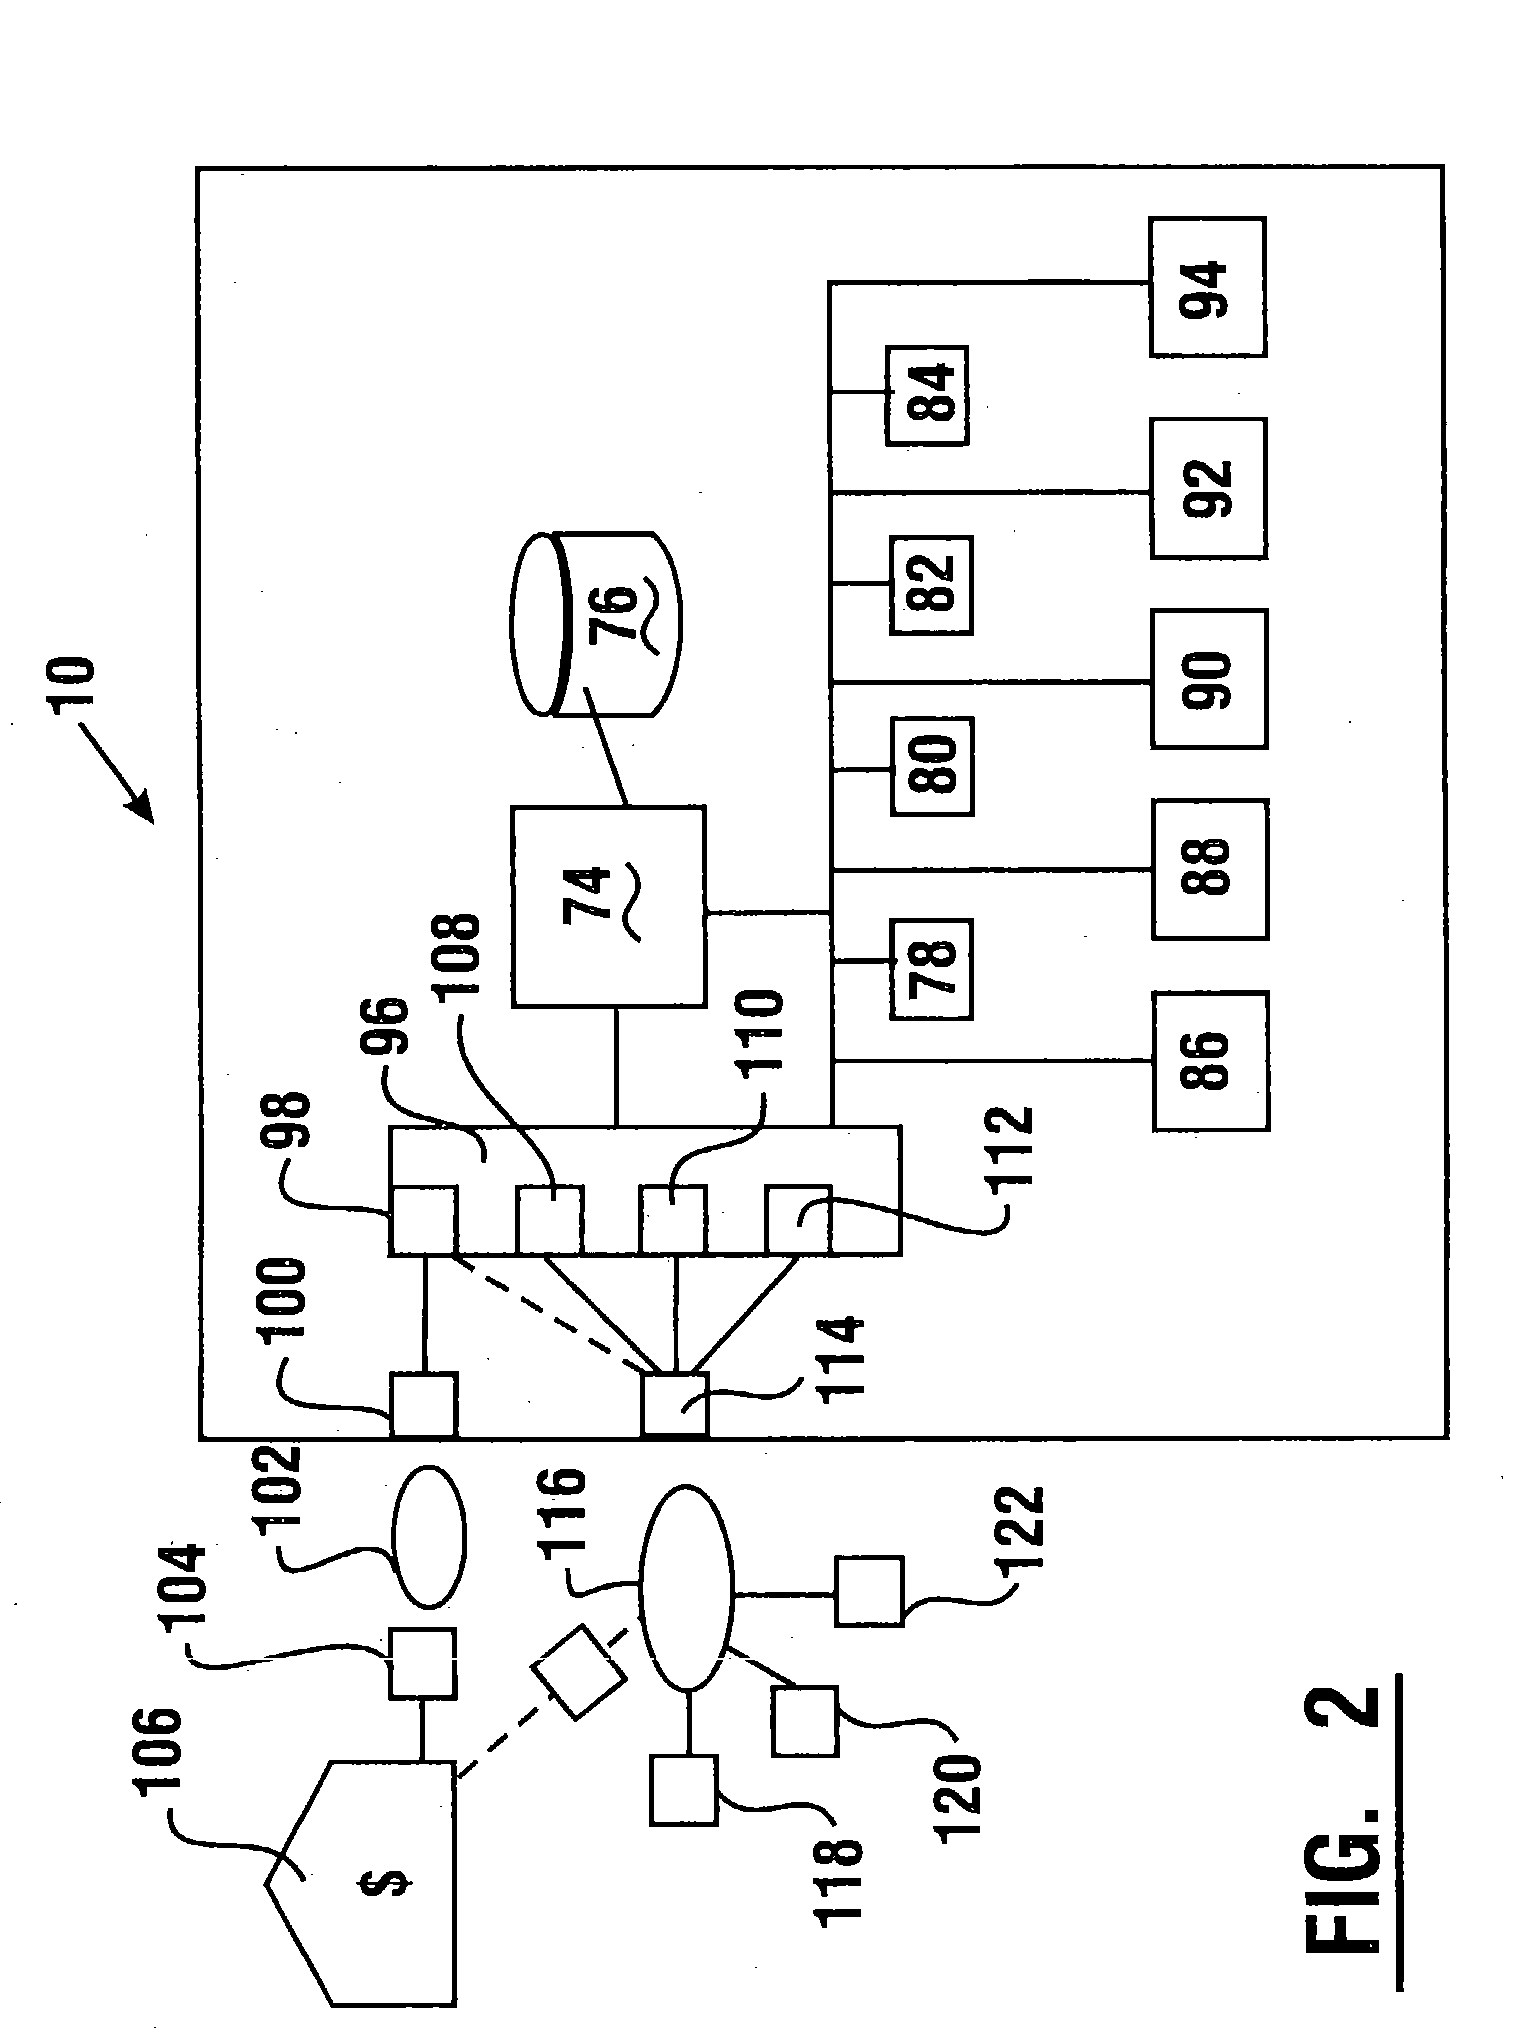 Automated banking apparatus and method